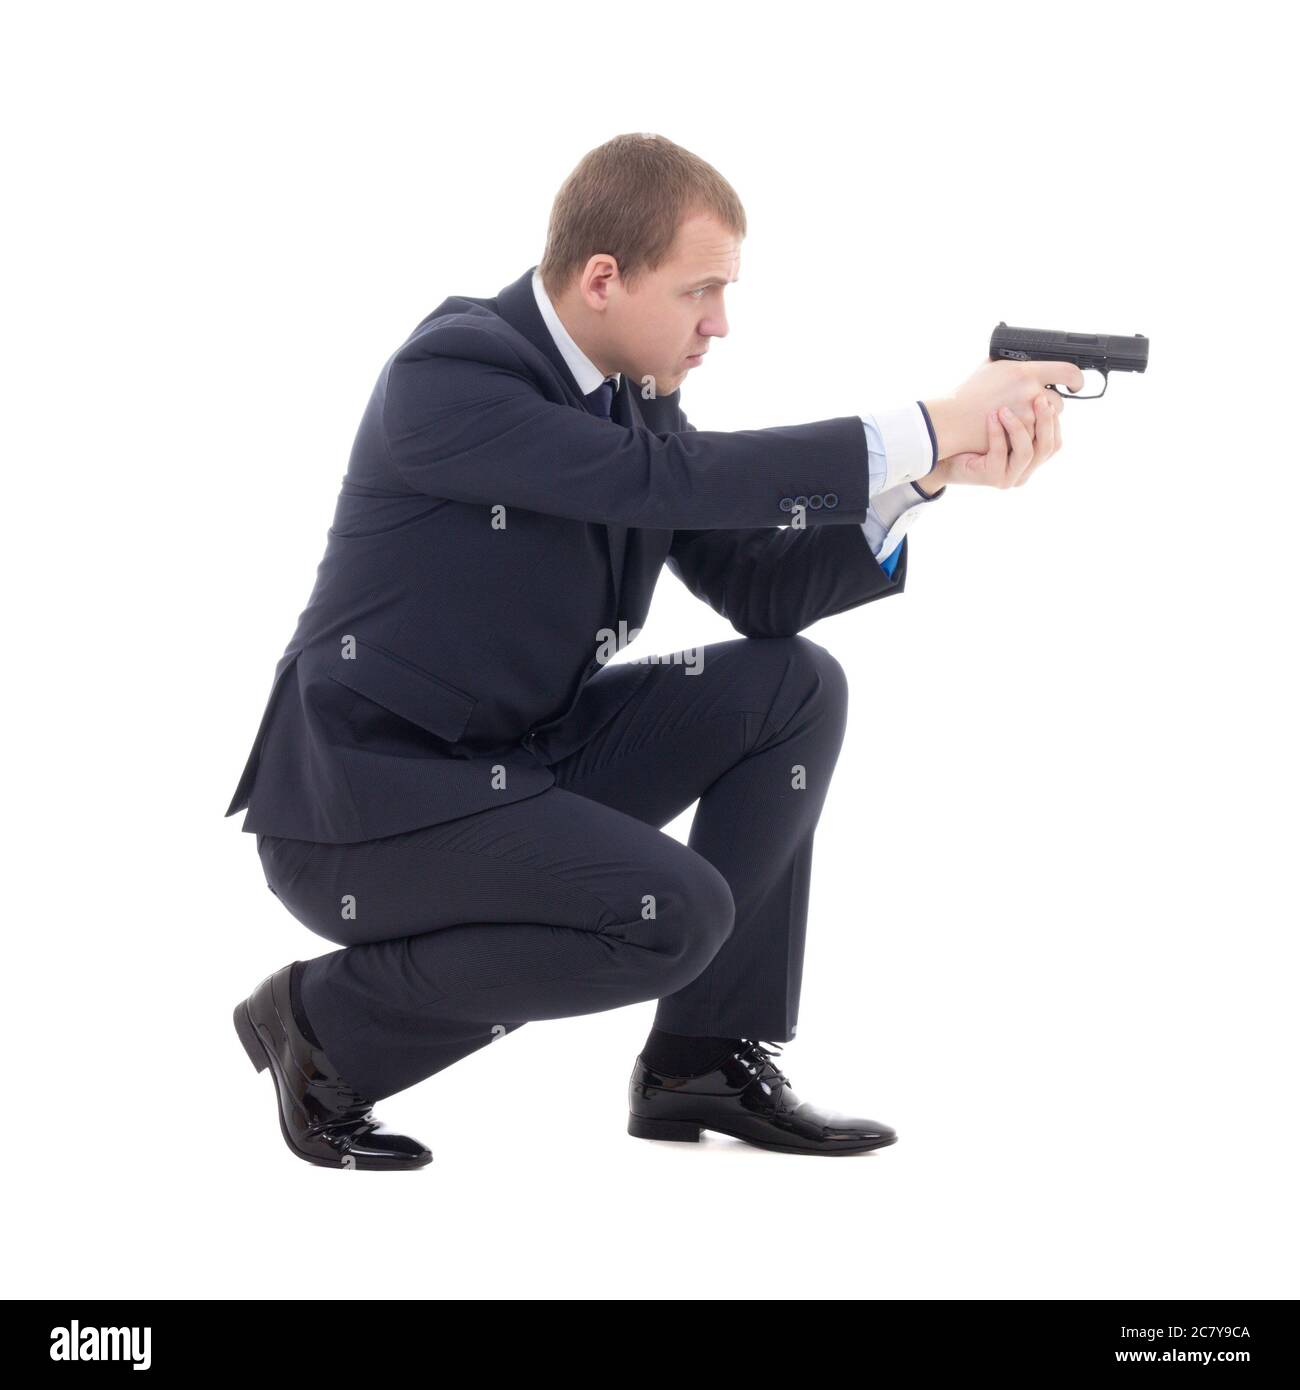 special agent man in business suit sitting and shooting with gun isolated on white background Stock Photo